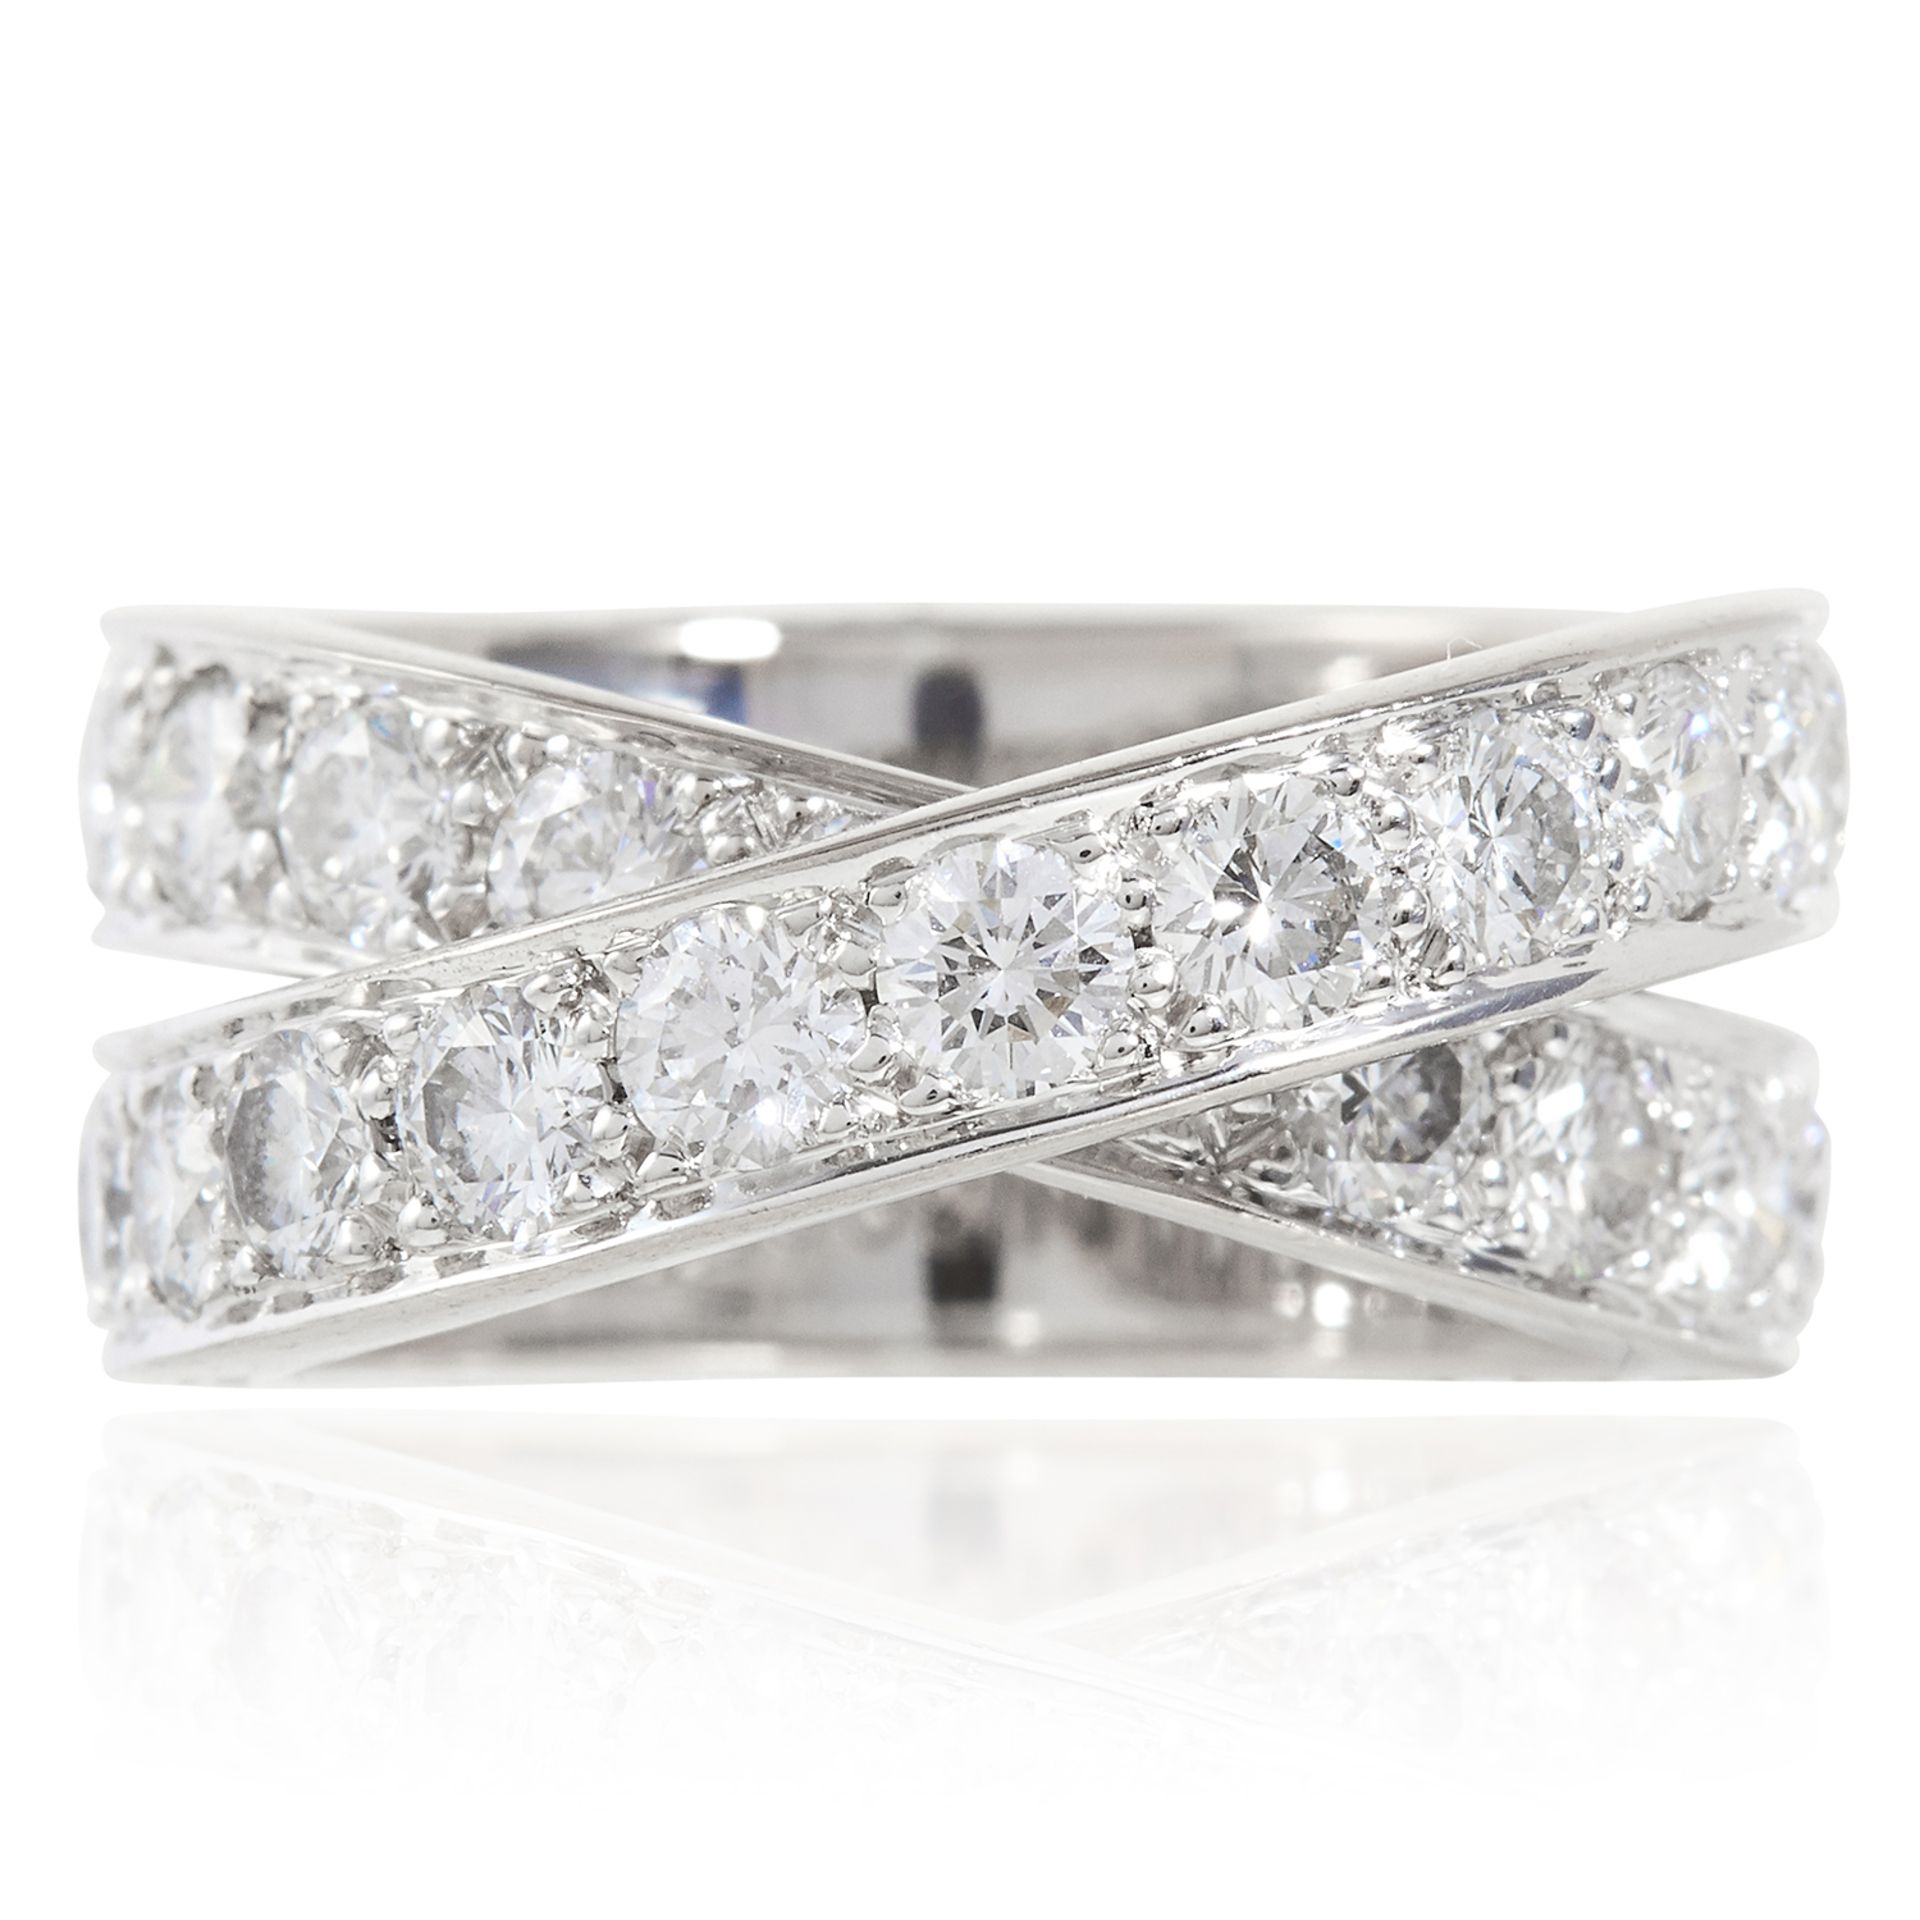 A 2.75 CARAT DIAMOND DRESS RING, CARTIER in 18ct white gold, set with two rows of round cut diamonds